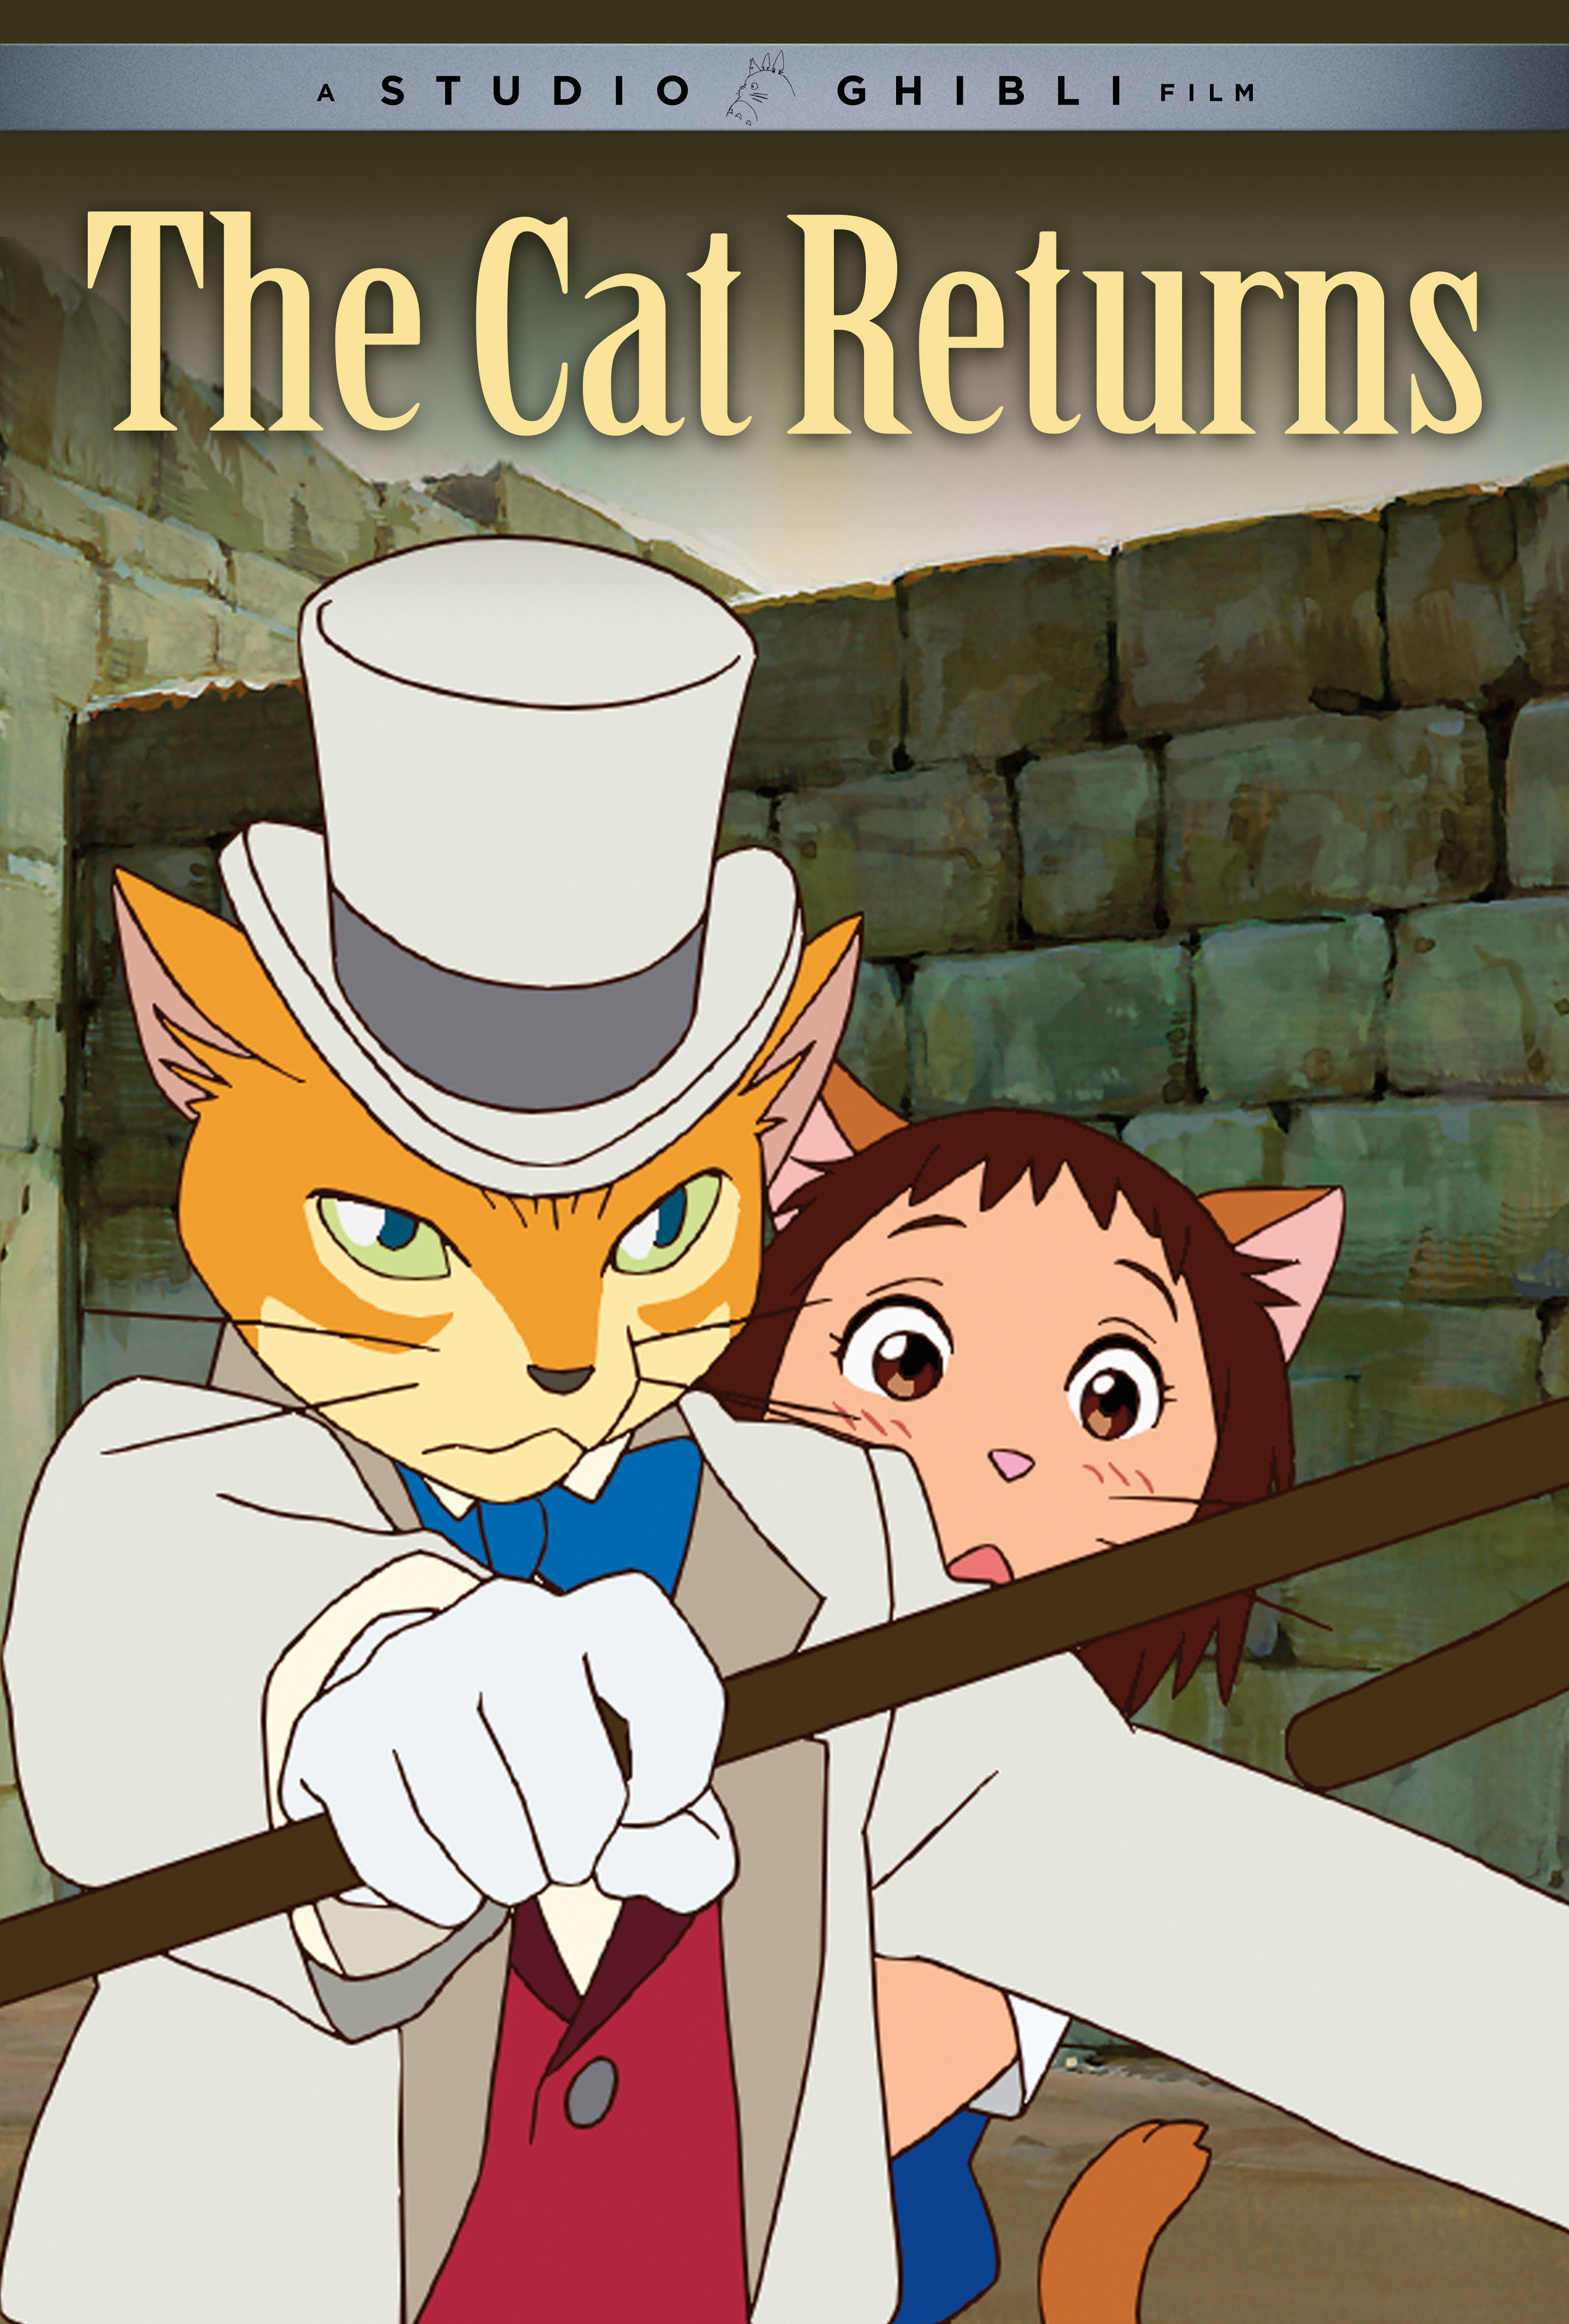 The movie poster for the GKIDS release of The Cat Returns, a 2002 theatrical anime film directed by Hiroyuki Morita and animated by Studio Ghibli. 